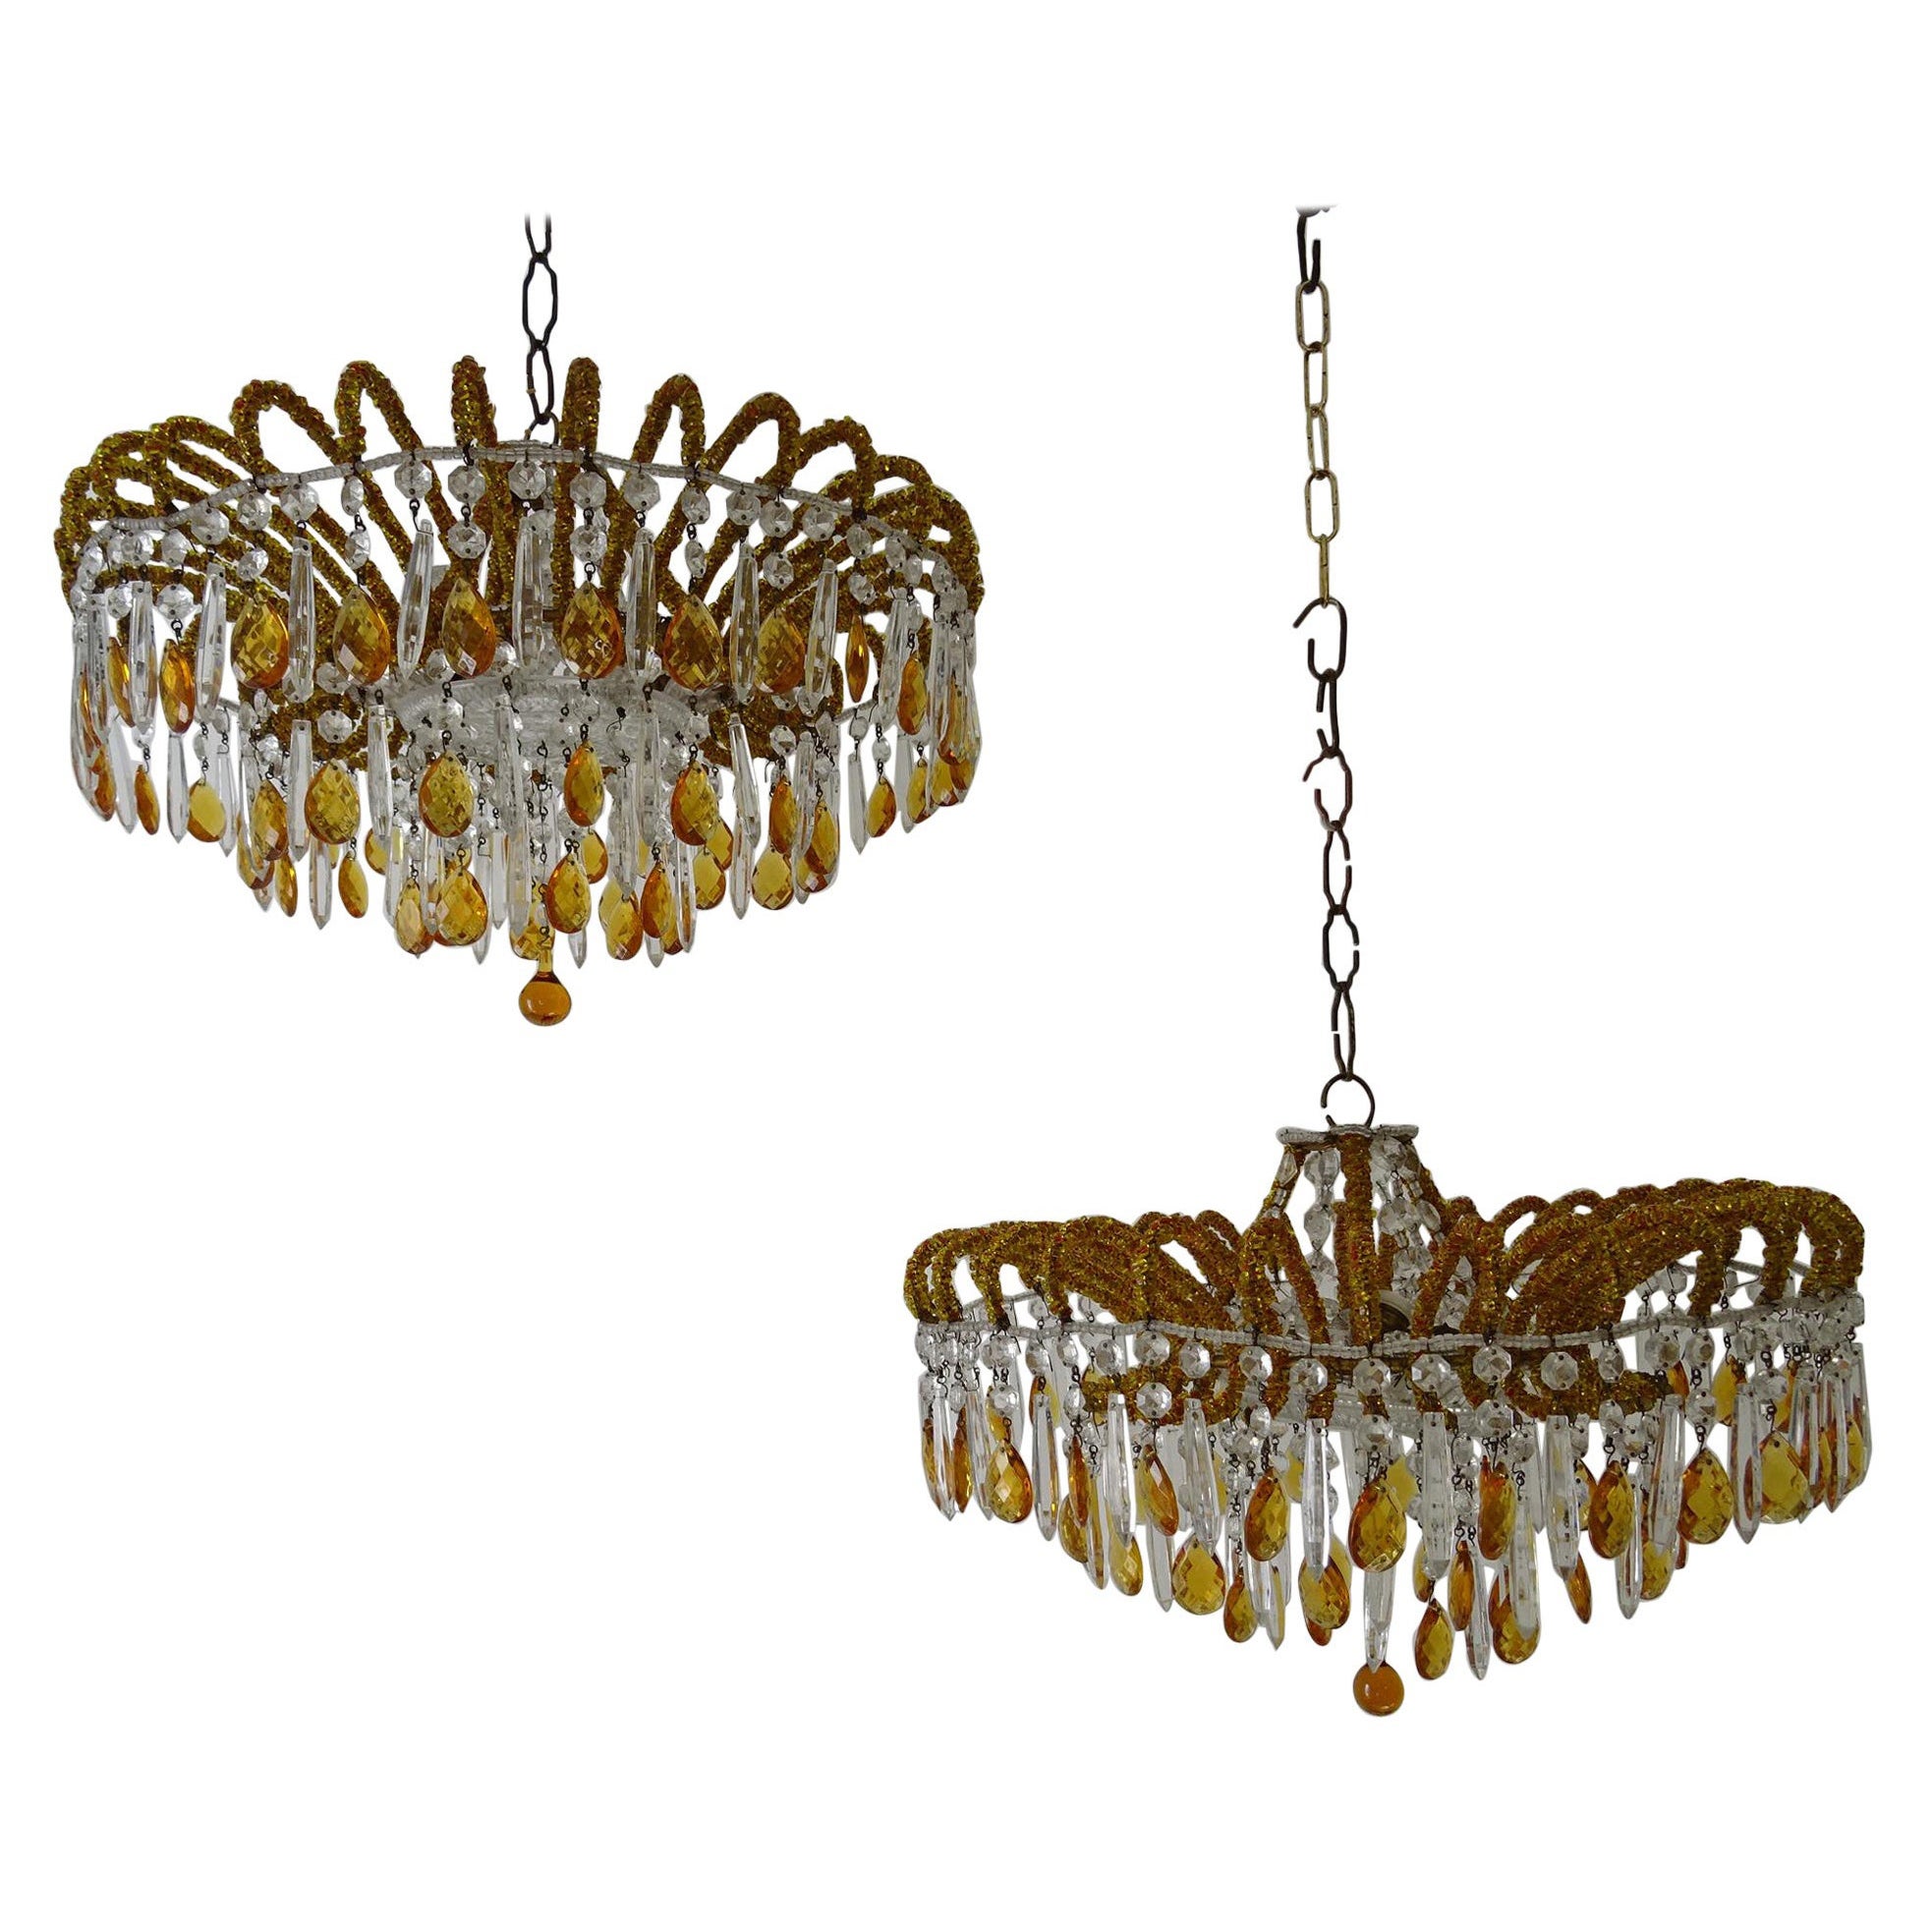 1 of 2 Italian Micro-Beaded Yellow Amber Flush Mount Crystal Prisms Chandelier For Sale